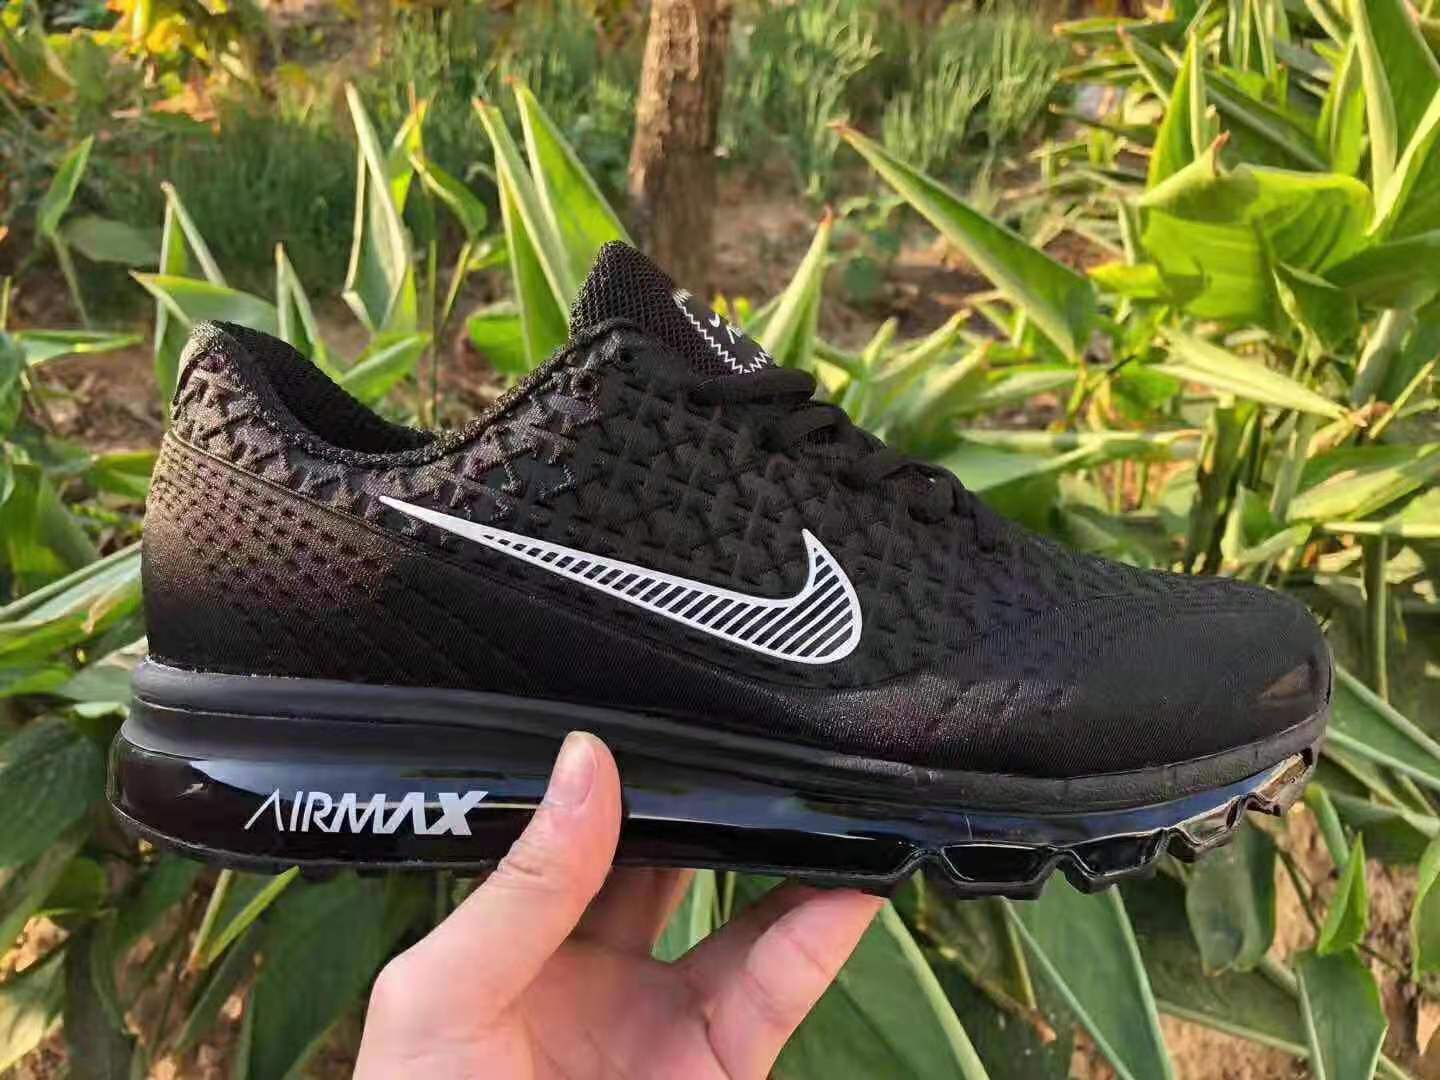 Men's Hot sale Running weapon Nike Air Max 2019 Shoes 088